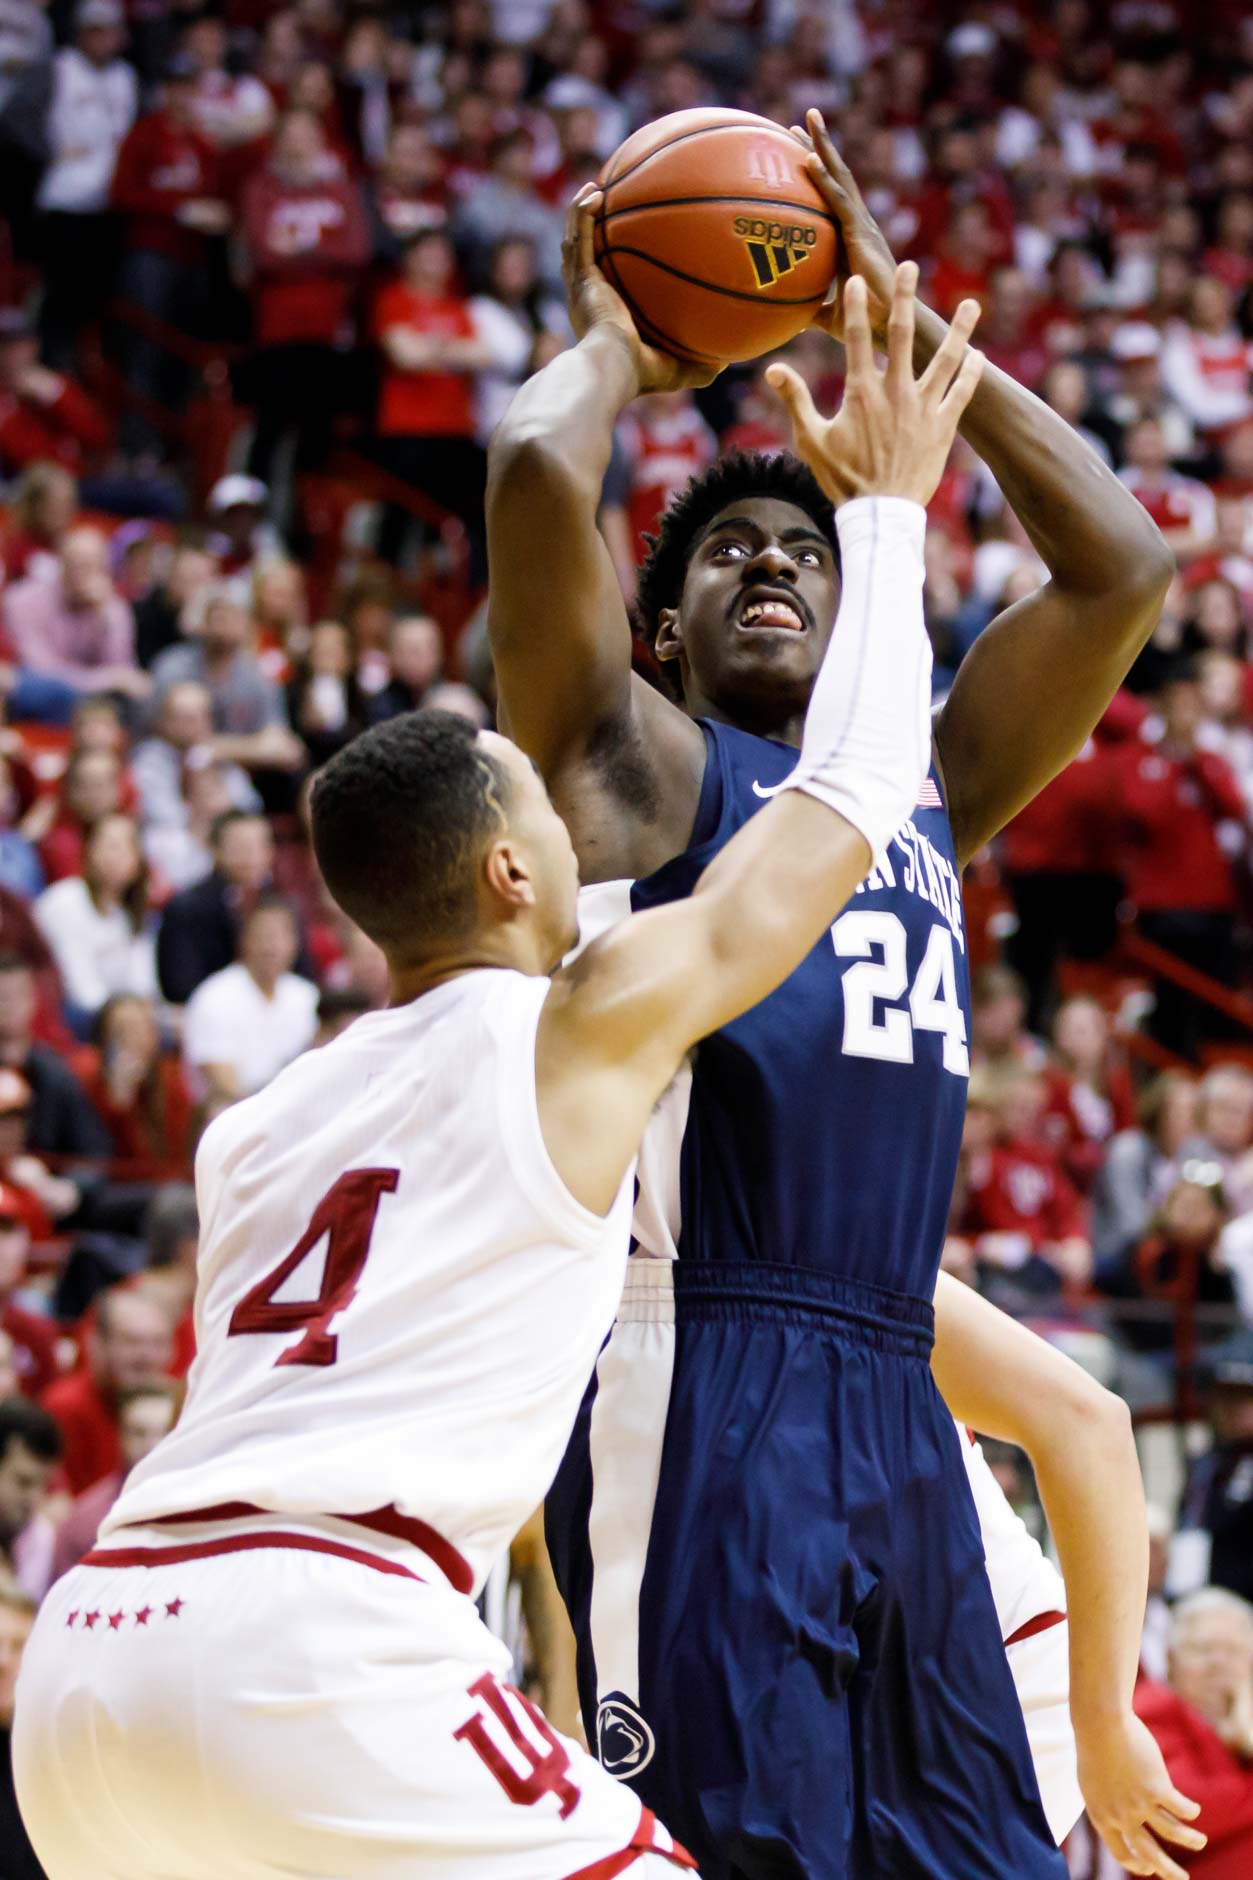 Penn State's Mike Watkins (24) shoots over Indiana's Trayce Jackson-Davis (4) during a NCAA men's basketball game at Simon Skjodt Assembly Hall in Bloomington, Indiana on Sunday, Feb. 23, 2020. (Photo by James Brosher)